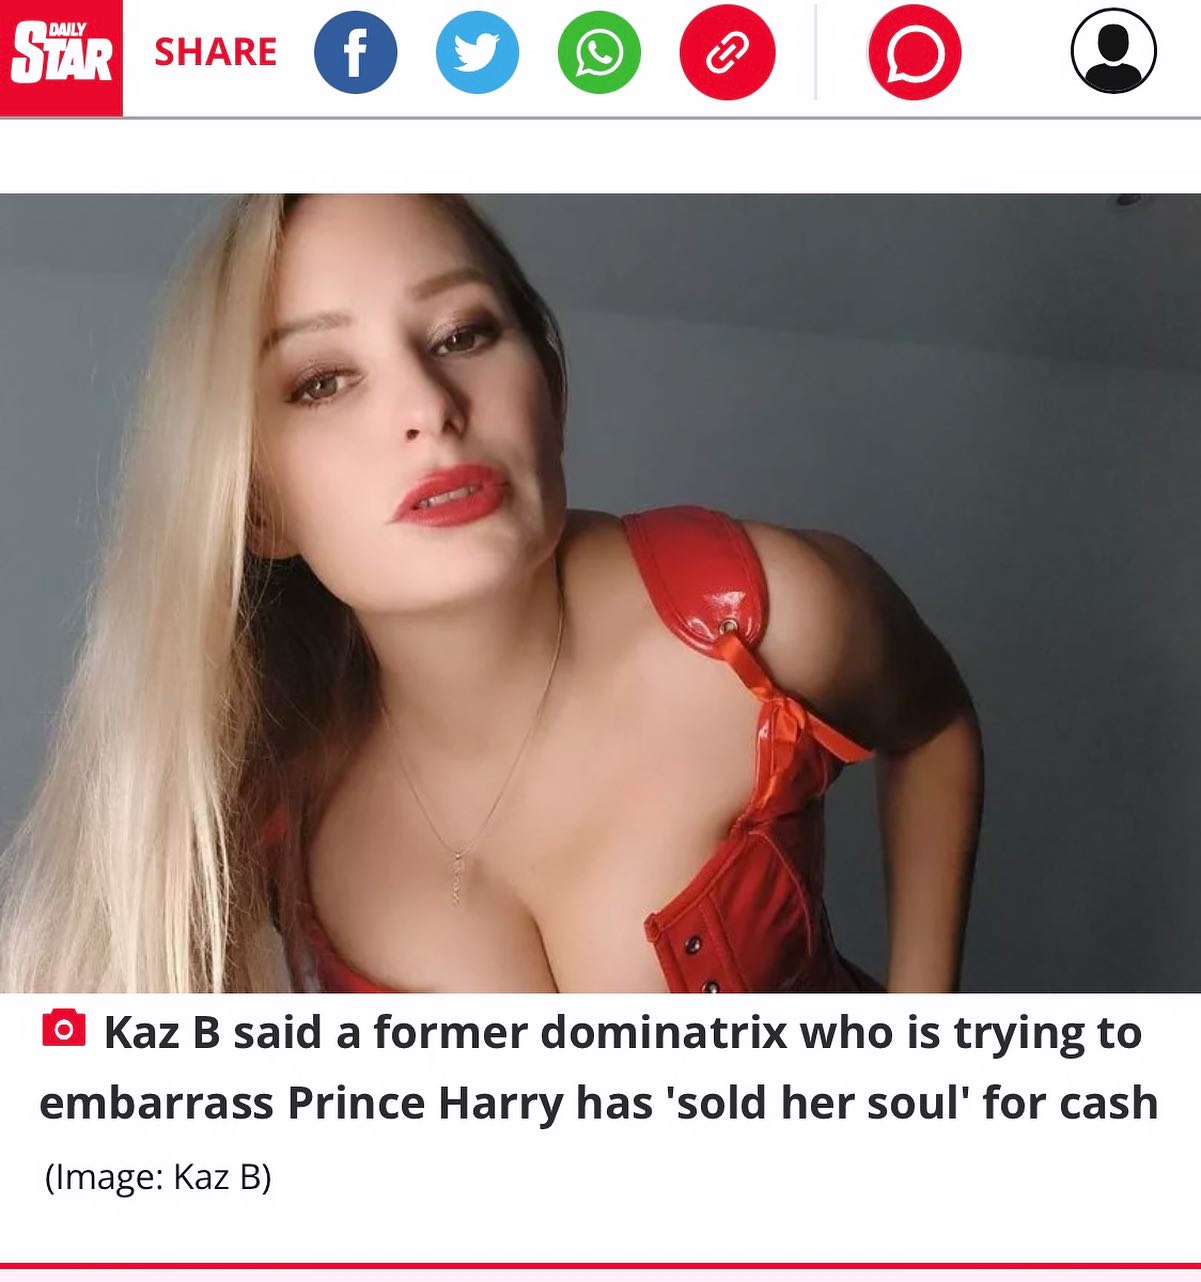 In the @dailystar sharing some thoughts on Carrie Royale exposing Prince Harry and threatening to sell his nudes. 

https://www.dailystar.co.uk/real-life/im-dominatrix-stars—party-32294371

@liammcinerney94 

#News #Royals #princeharryscandal #breakingnews #tabloid #onlinenews #opinionpiece #dailystar #bdsmcommunity #uk #thursdaythoughts